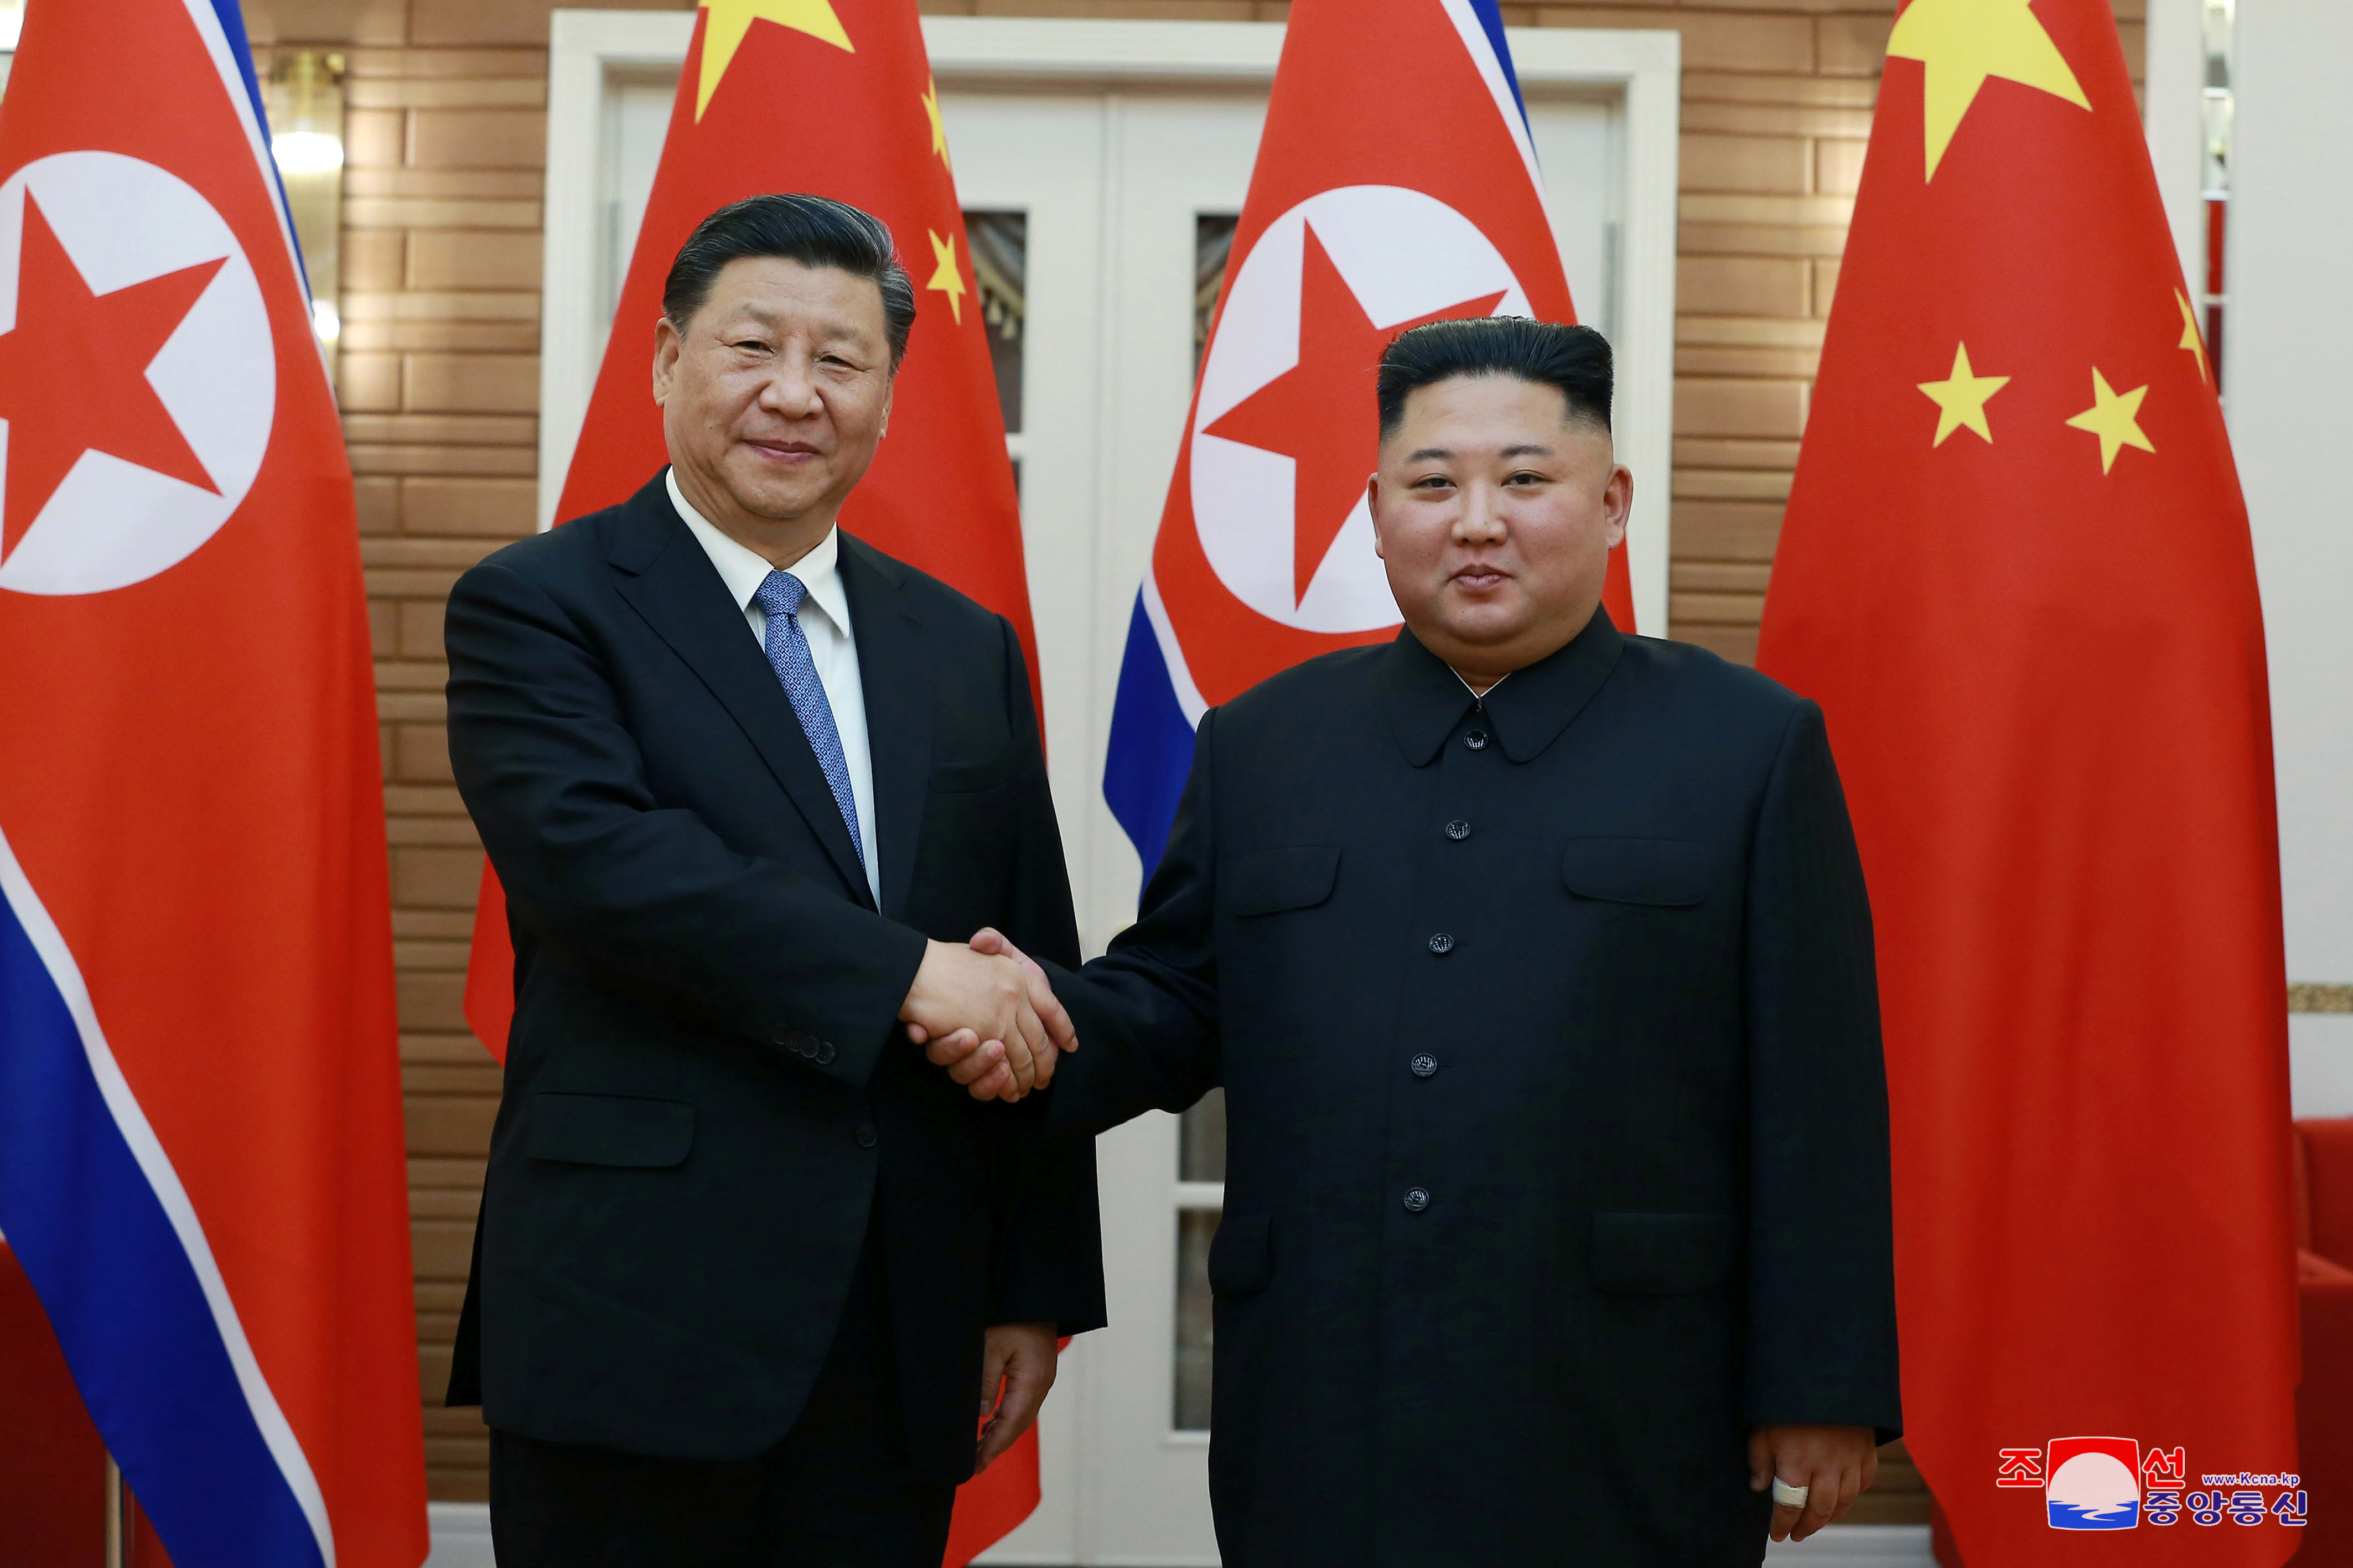 North Korean leader Kim Jong Un shakes hands with China's President Xi Jinping during Xi's visit in Pyongyang, North Korea in this undated photo released on June 21, 2019 by North Korea's Korean Central News Agency (KCNA)